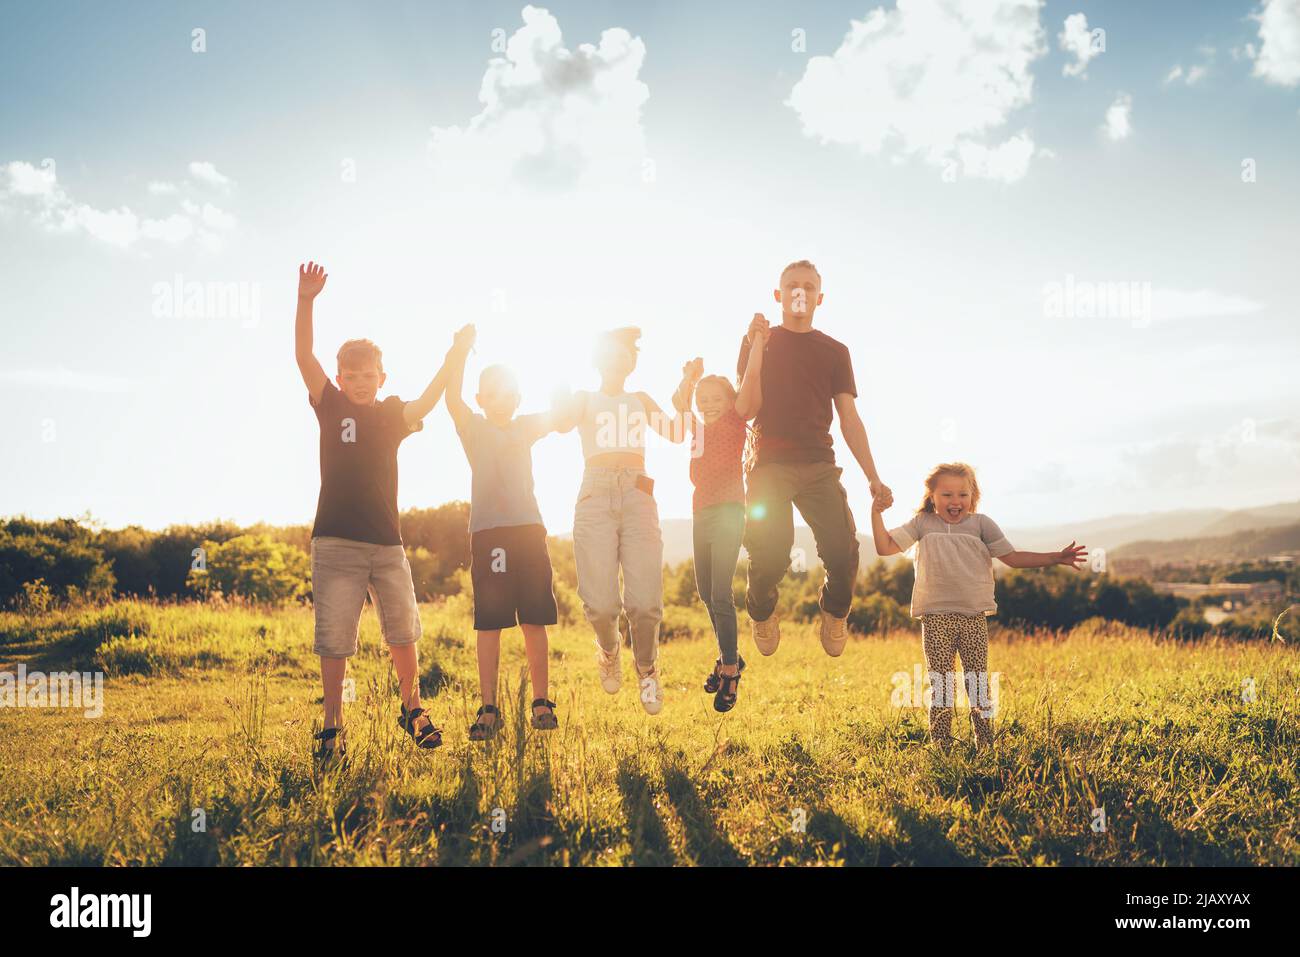 Six kids brothers and sisters teenagers and little kids funny jumping holding hands in hands on the green grass meadow with an evening sunset backgrou Stock Photo